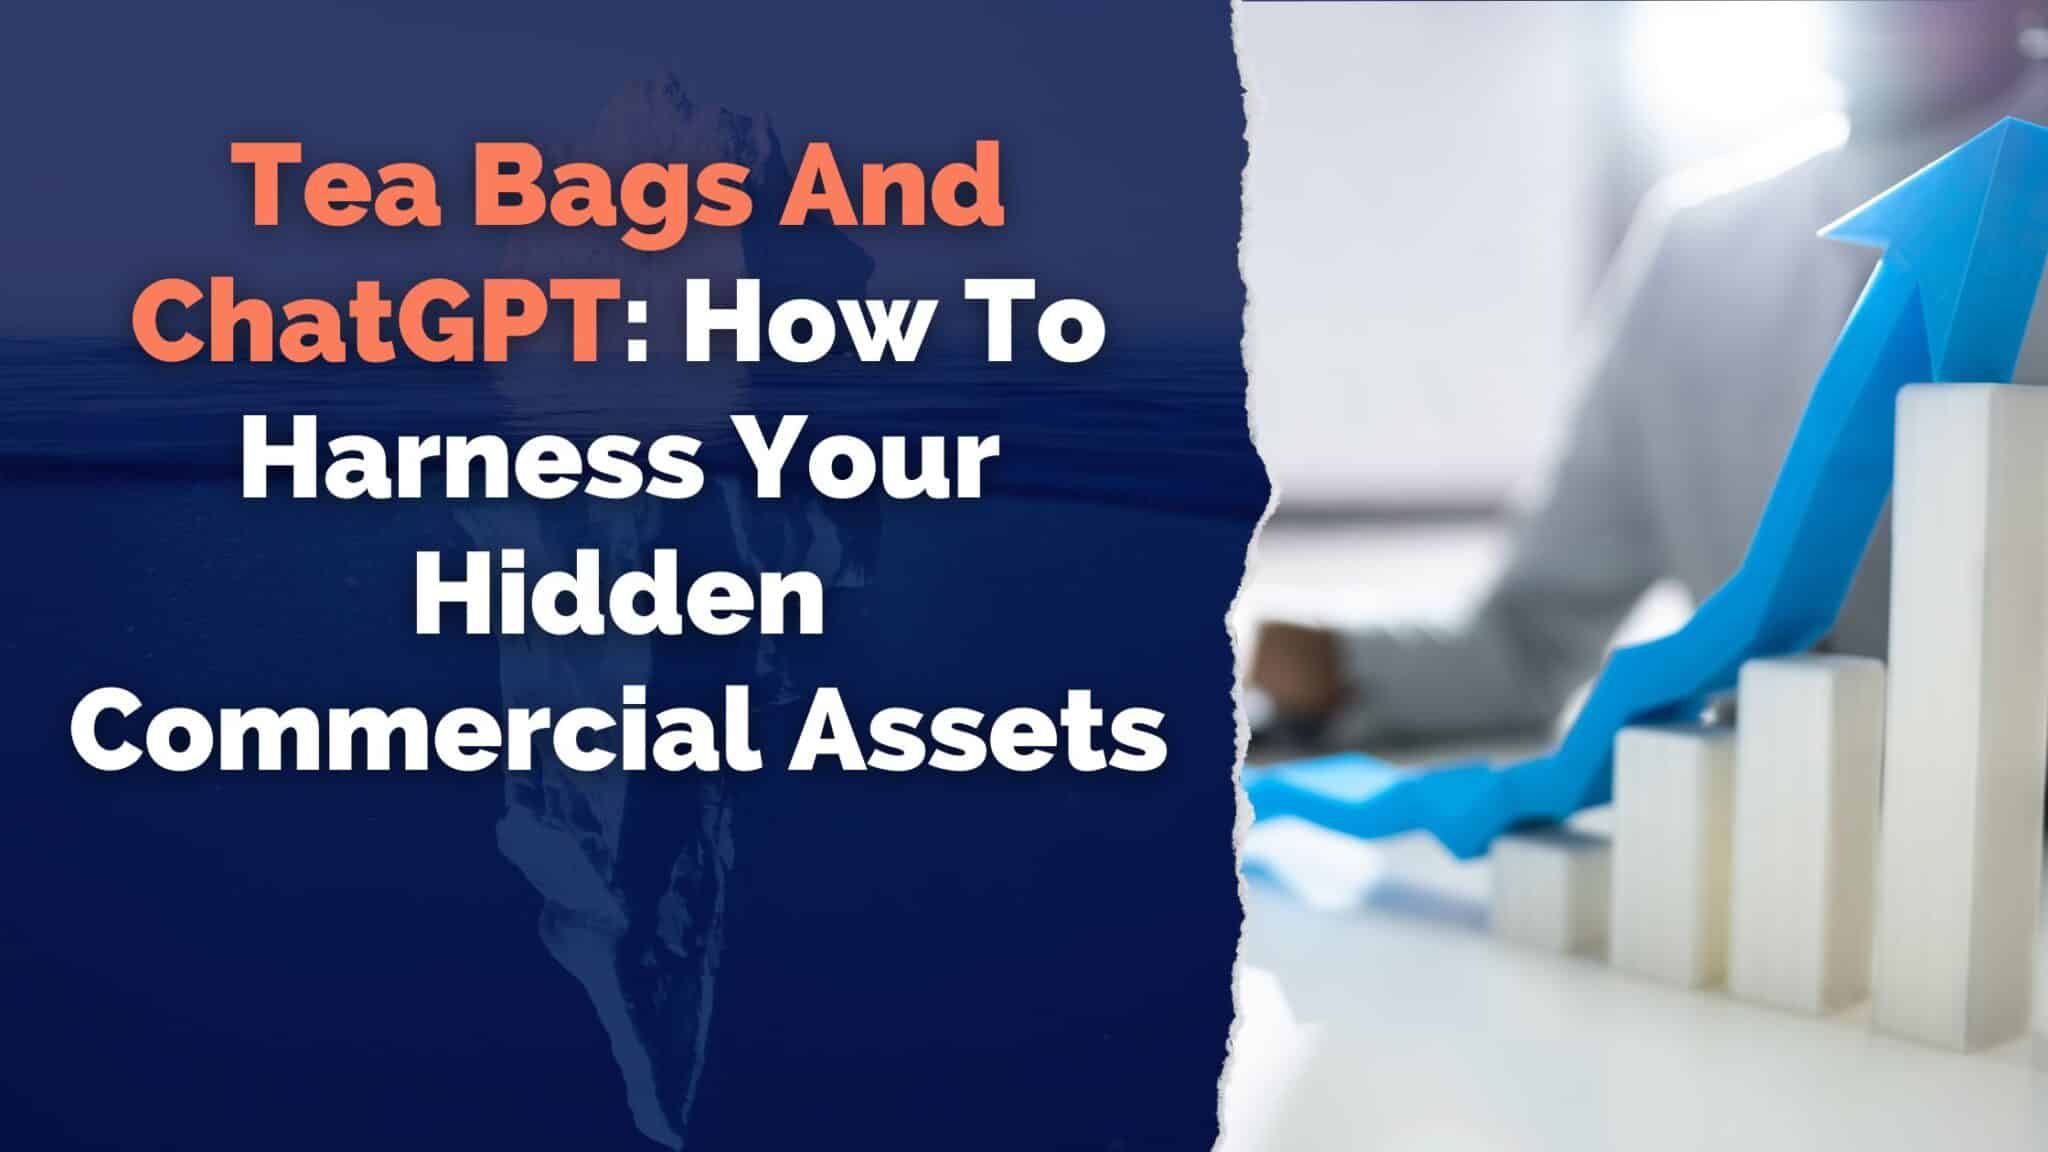 Tea Bags And ChatGPT: How To Harness Your Hidden Commercial Assets